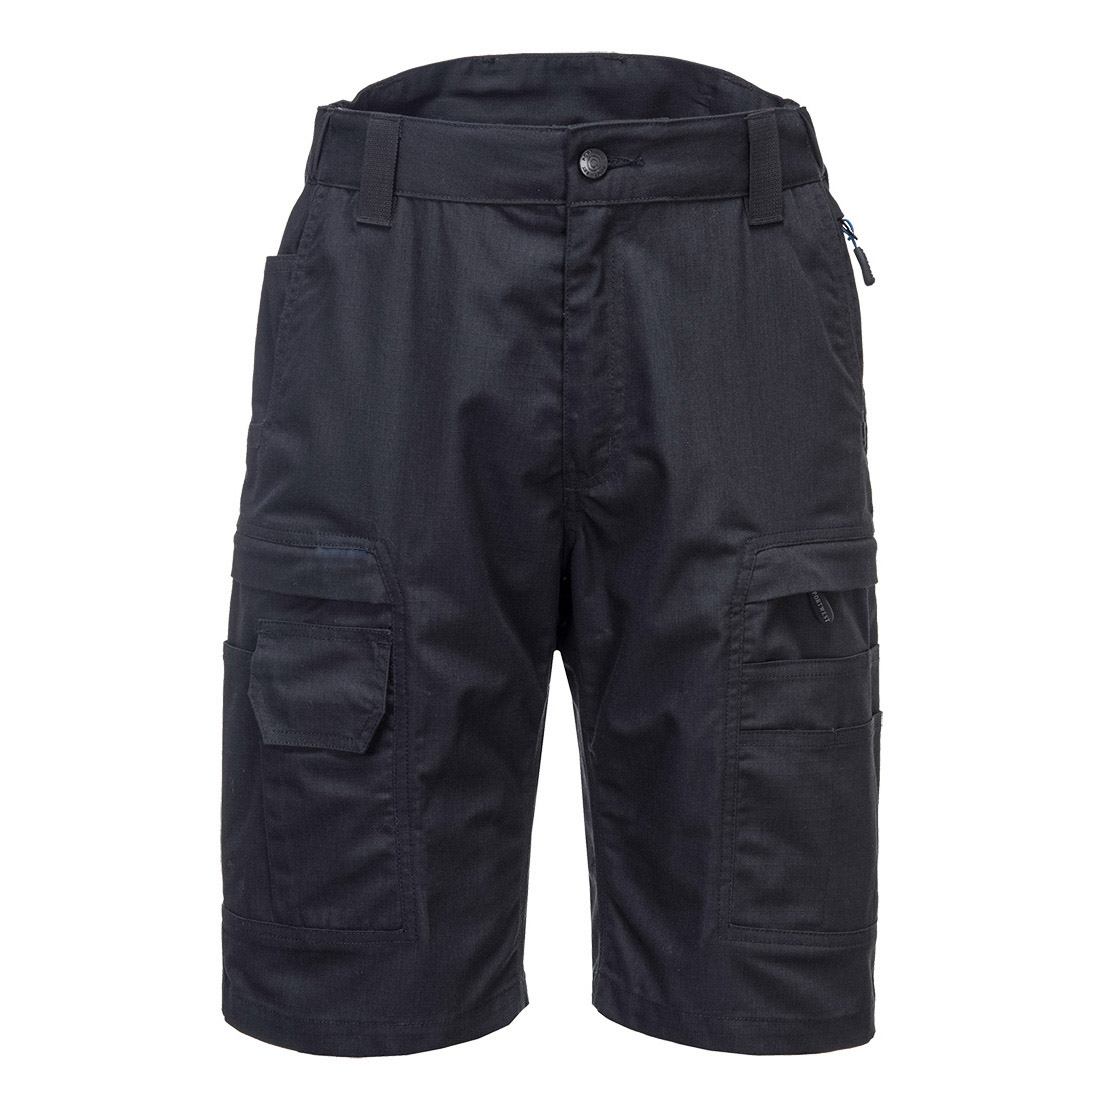 Classic Polycotton Multifunction Ripstop Work Shorts